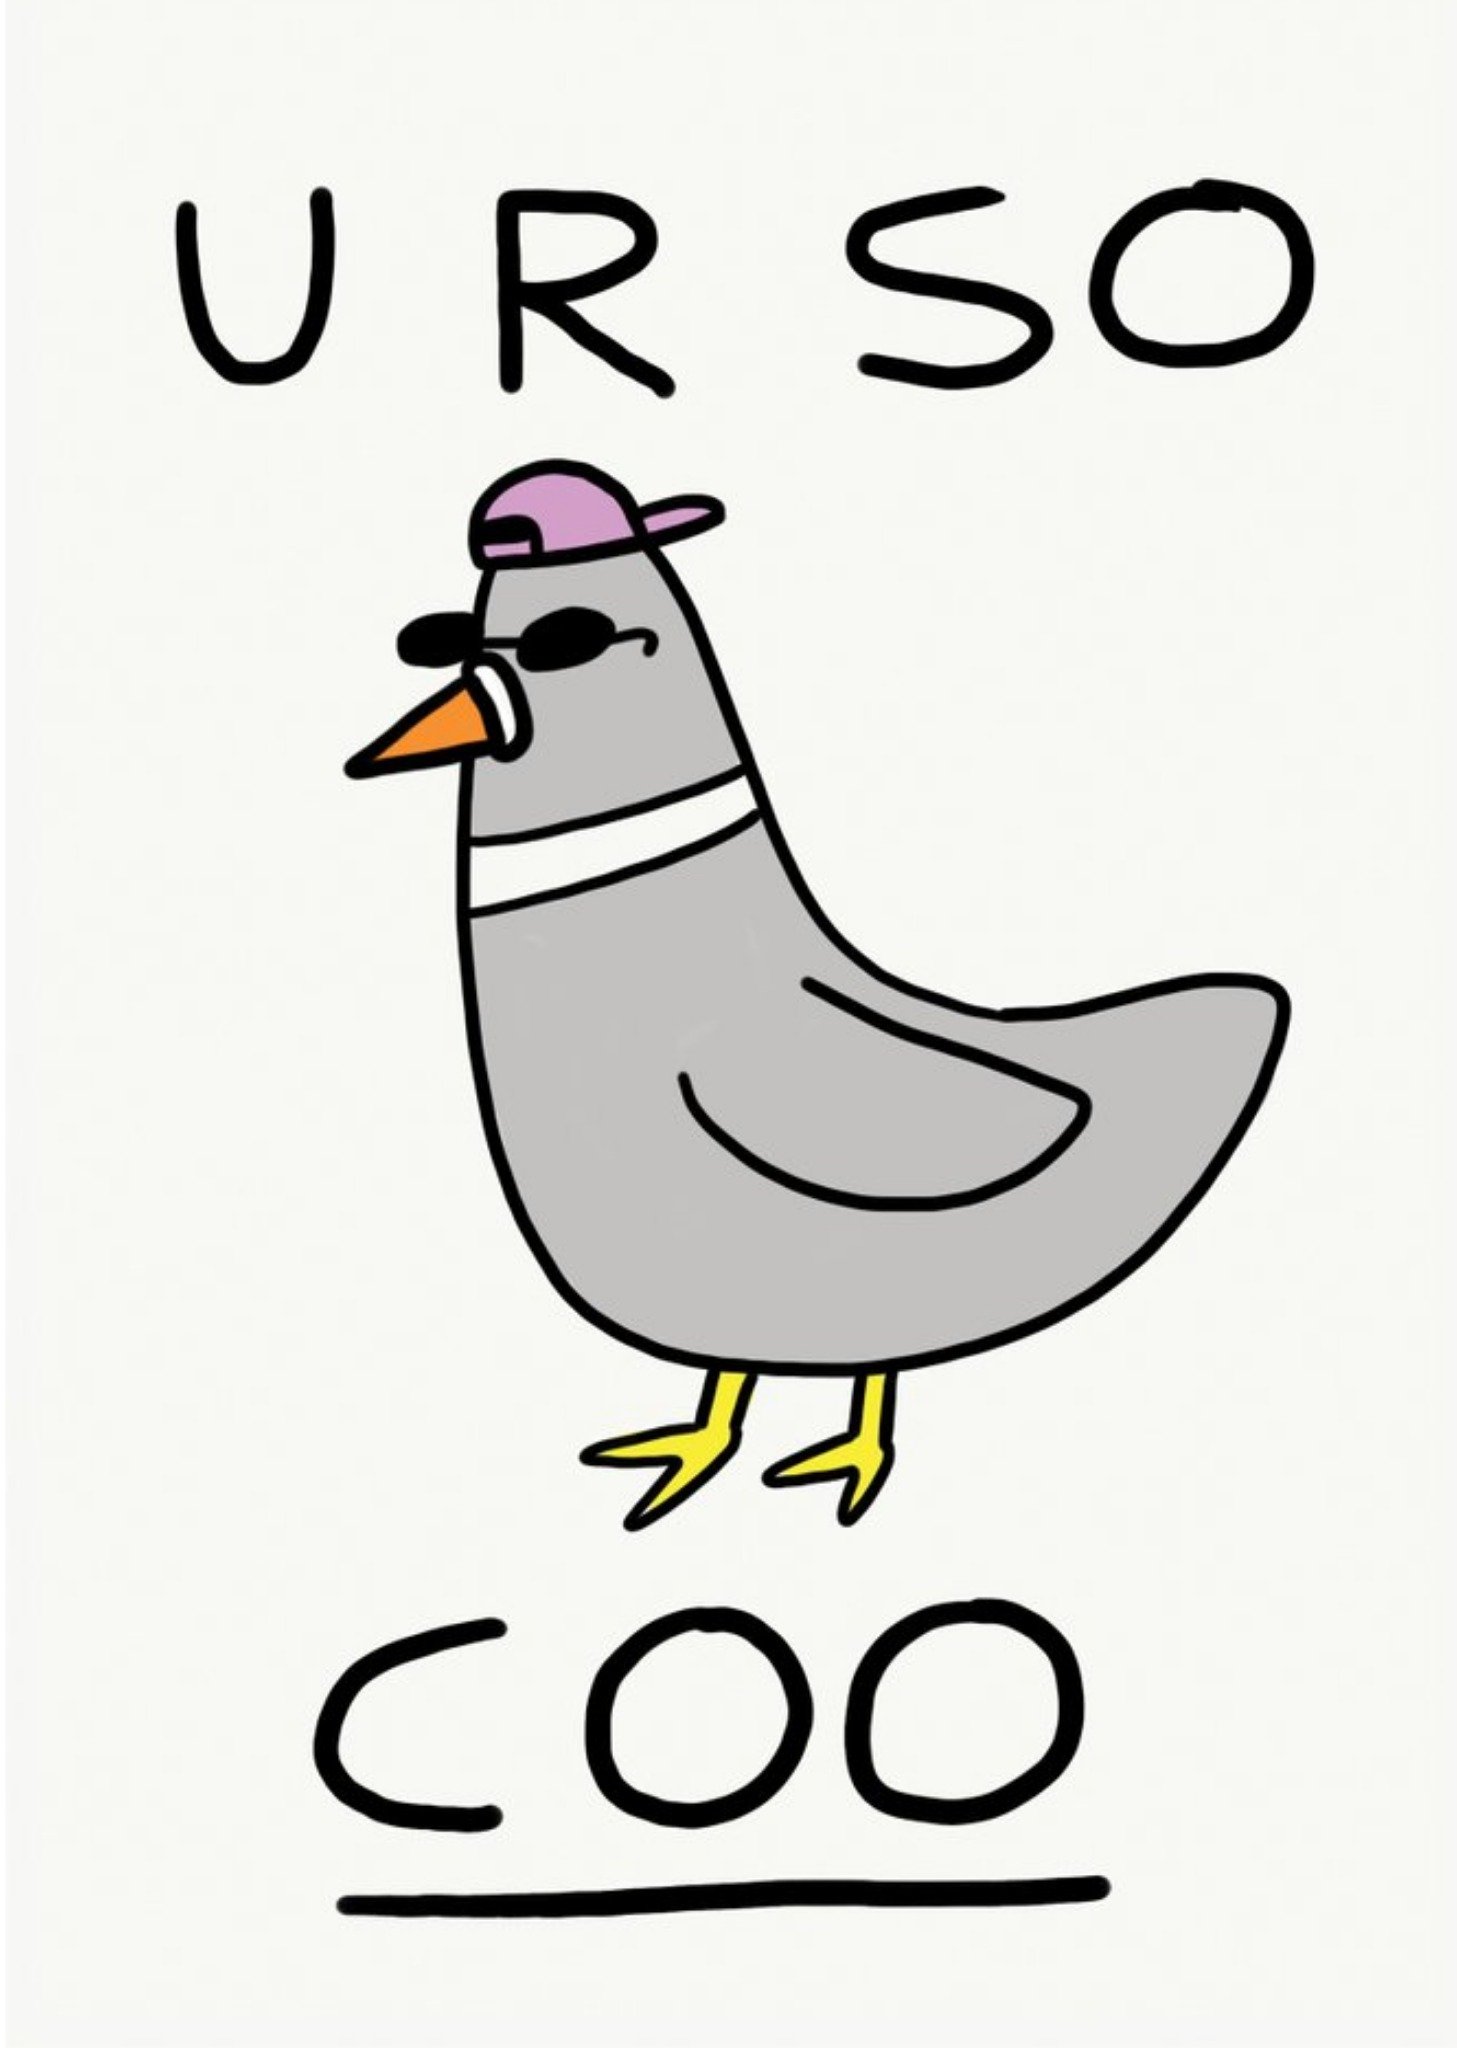 Jolly Awesome Your So Coo Pigeon Humour Birthday Card, Large